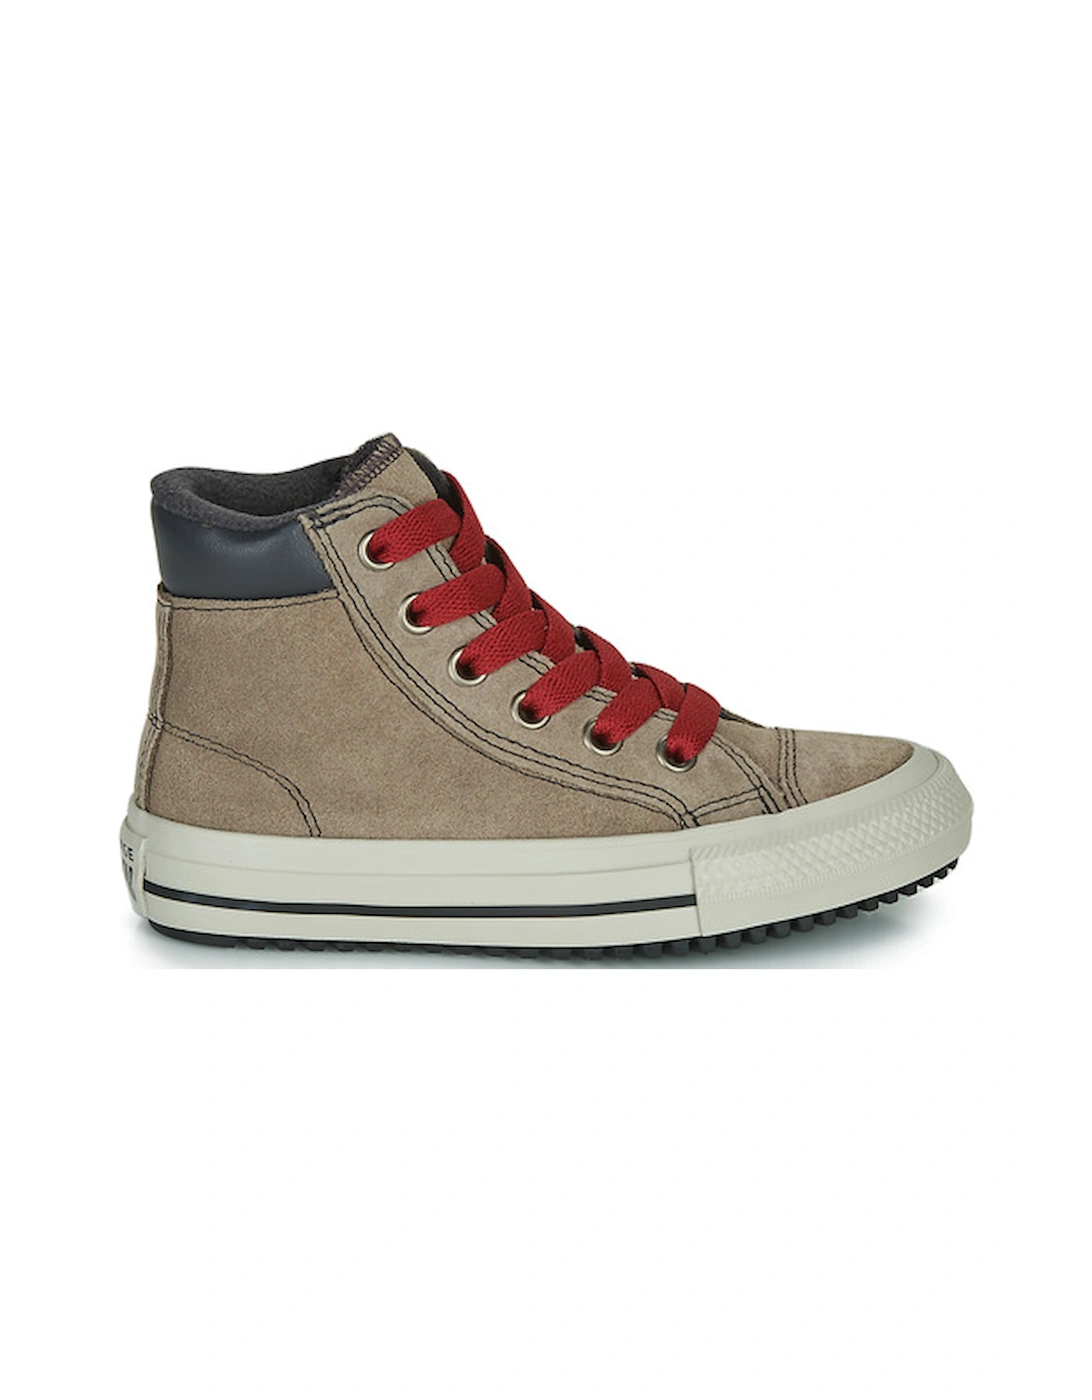 CHUCK TAYLOR ALL STAR PC BOOT BOOTS ON MARS - HI